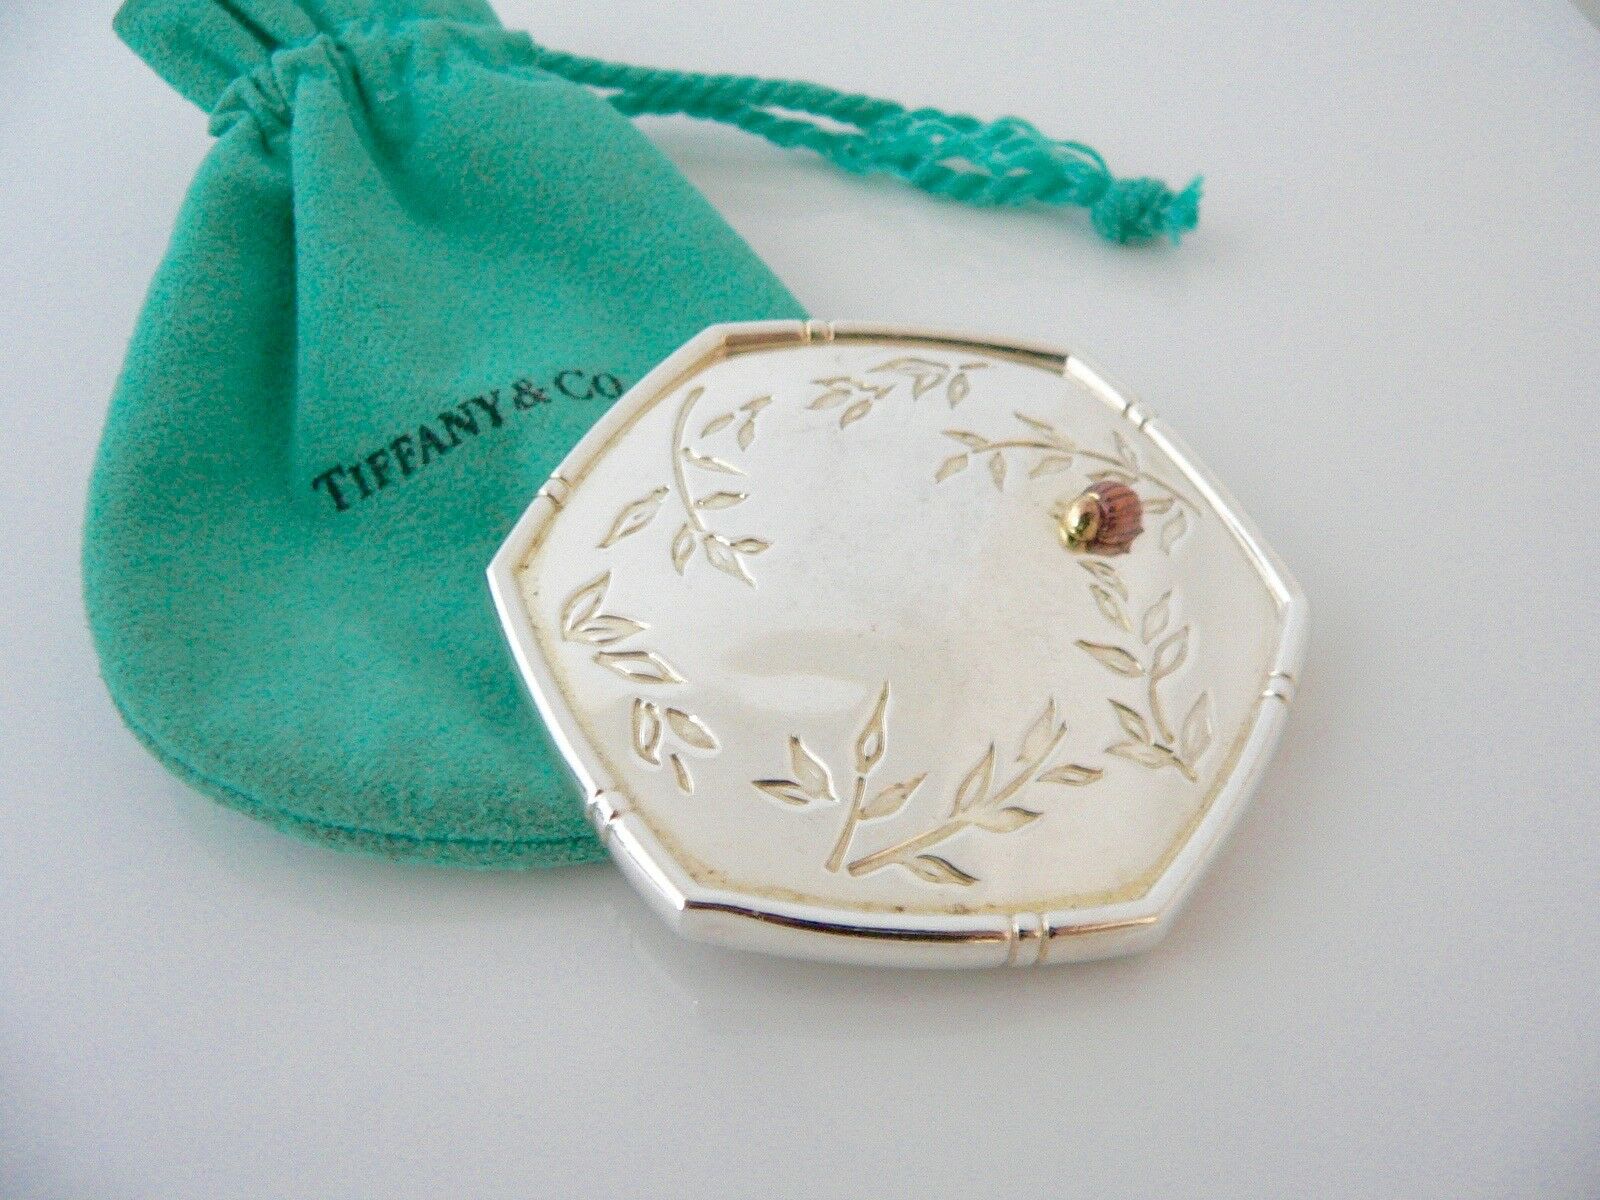 tiffany and co compact mirror